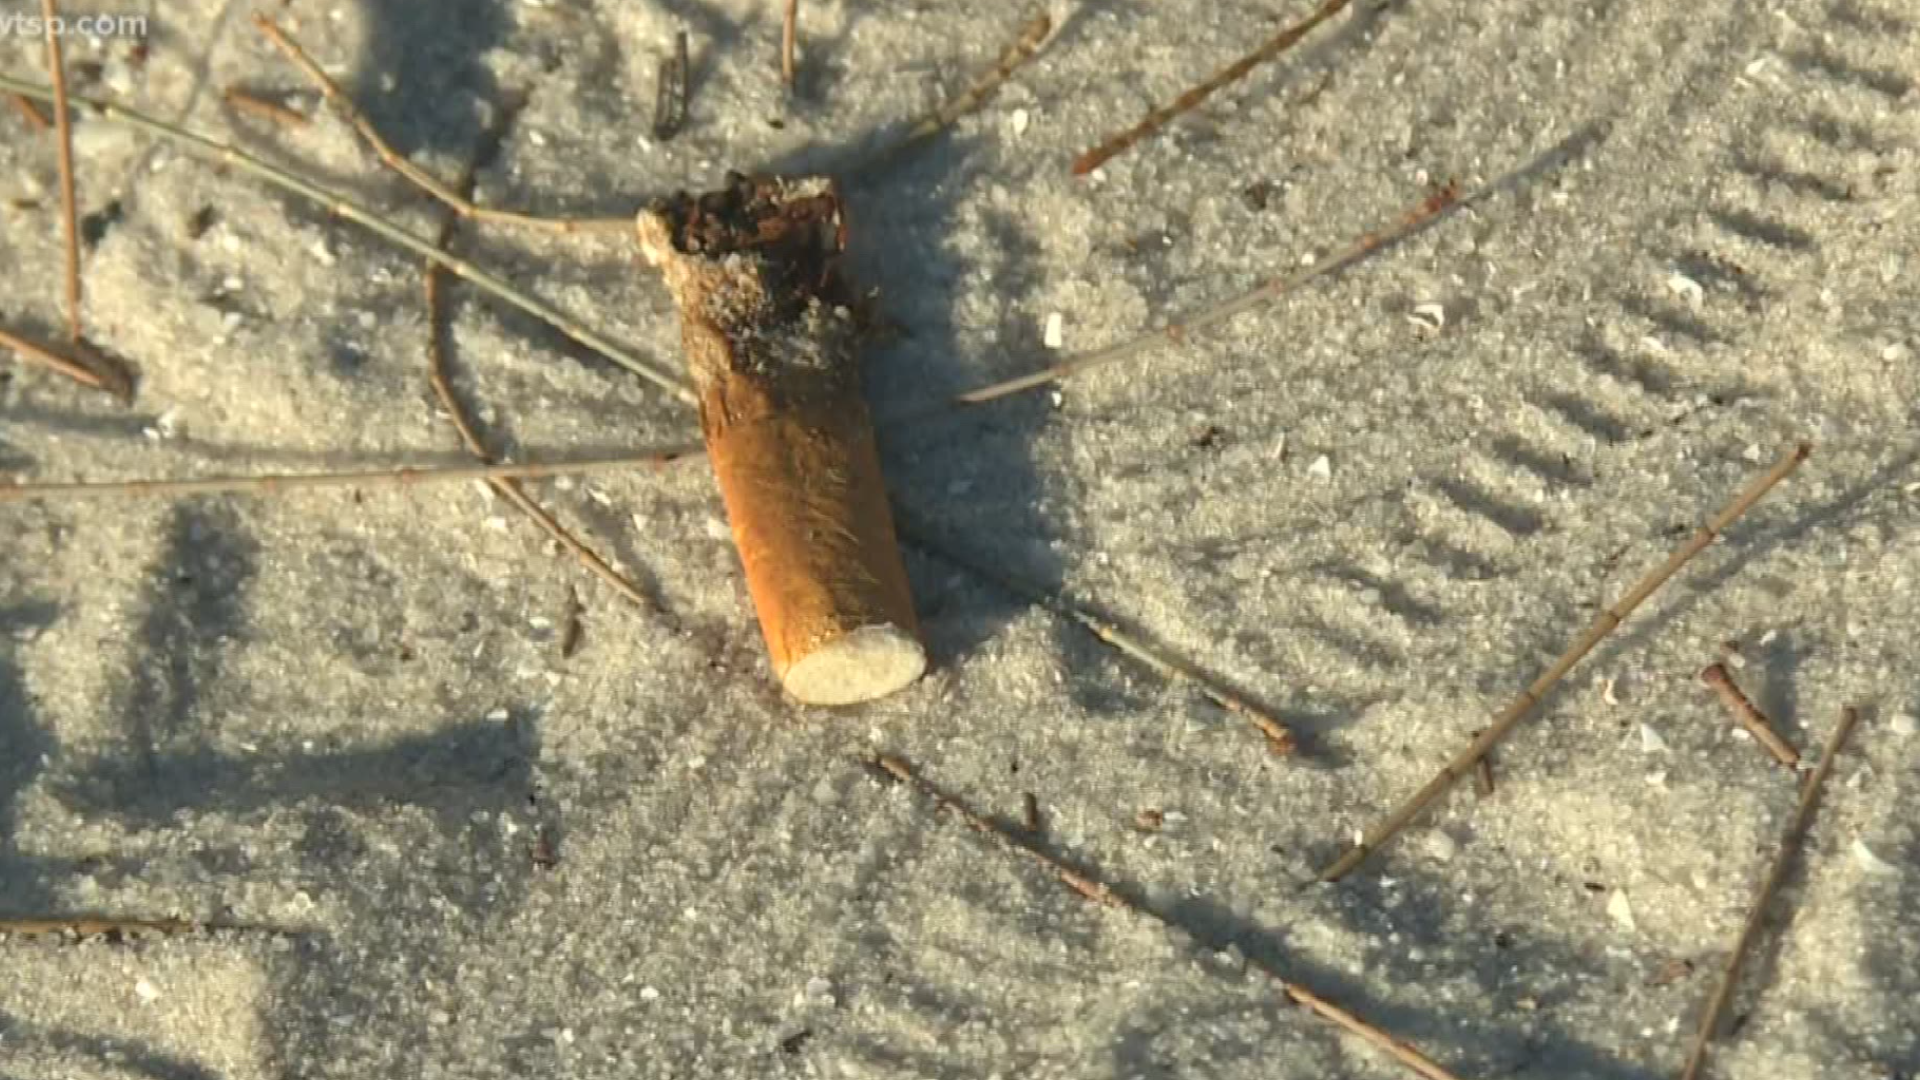 Cigarette butts are primarily made of plastic and that plastic is winding up in our oceans and wildlife.